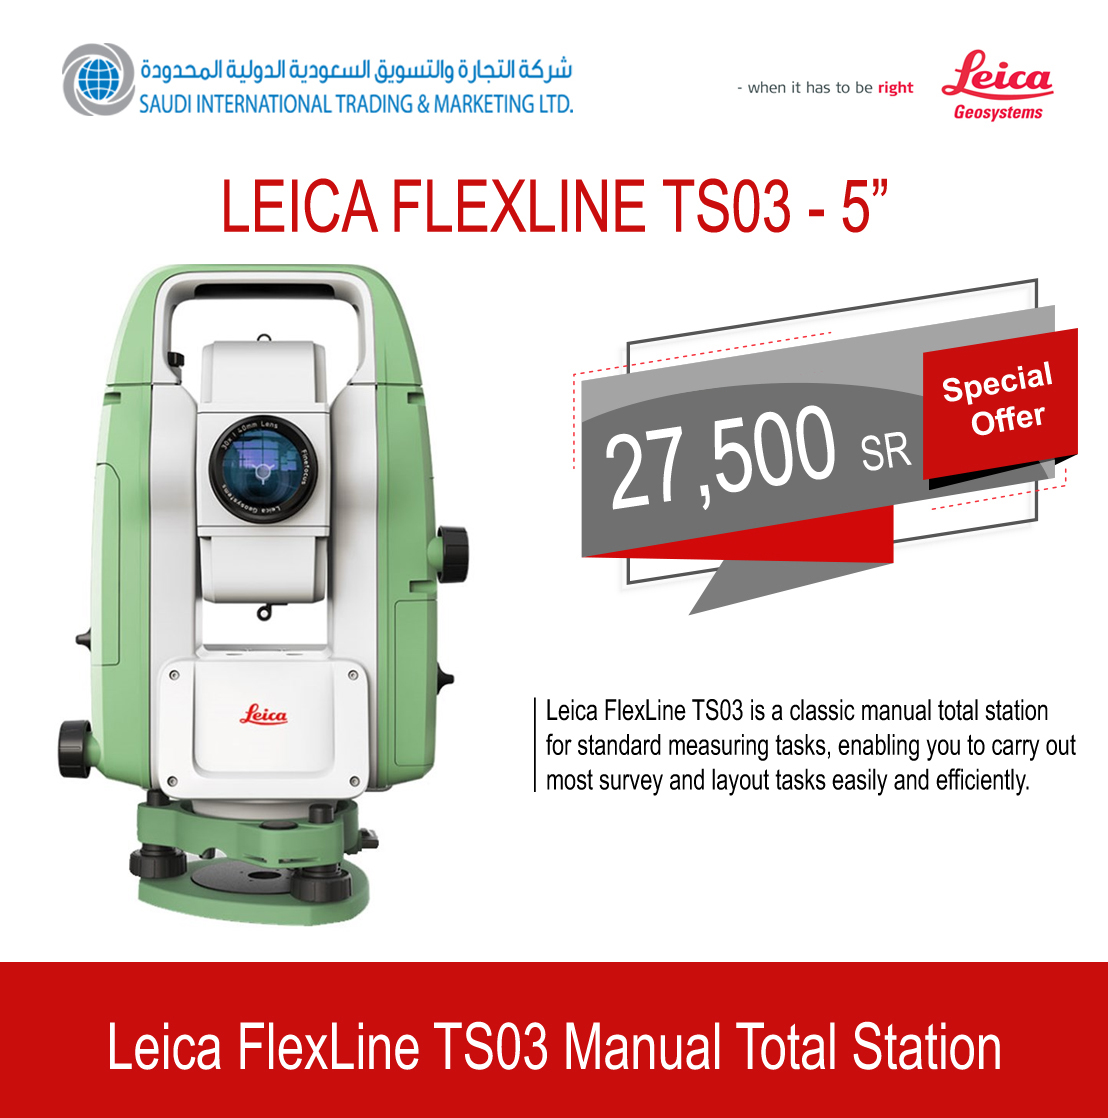 Leica GEB361 Li-ion Battery for FlexLine Series Manual Total Stations 